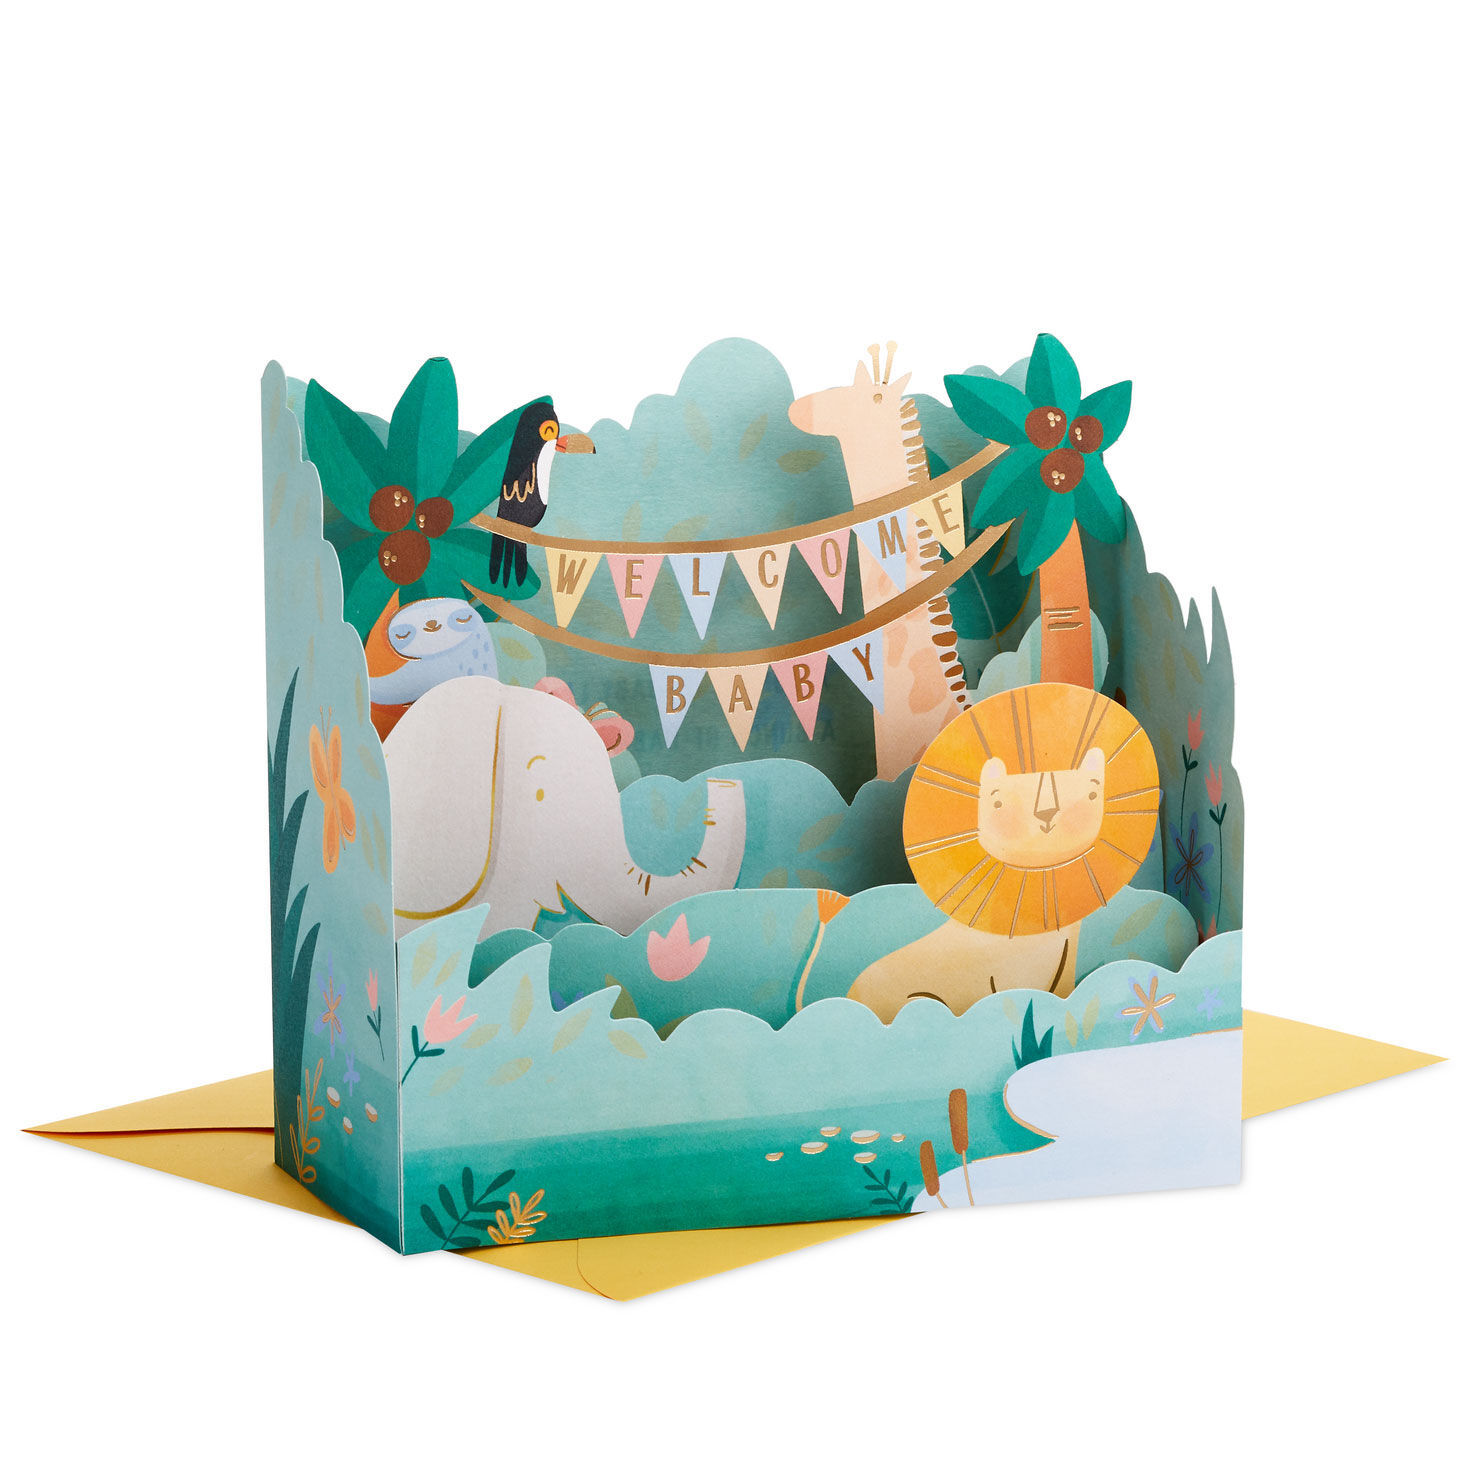 Welcome Baby Jungle Animals 3D Pop-Up New Baby Card for only USD 6.99 | Hallmark